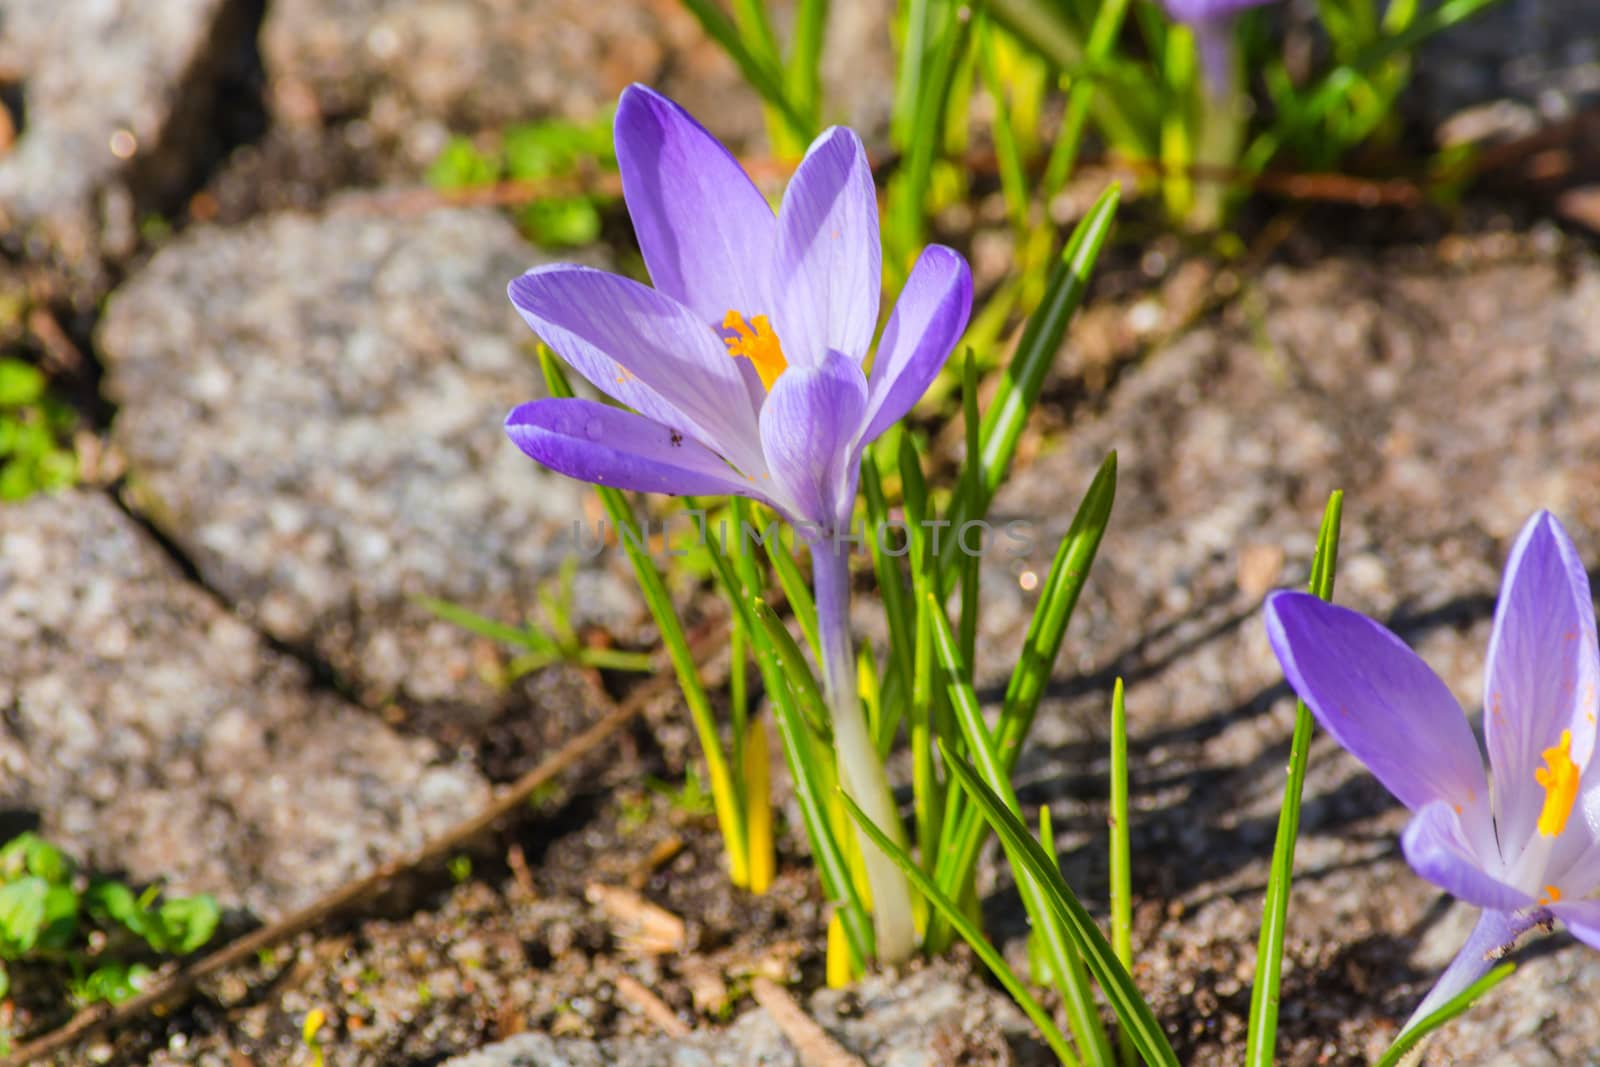 Crocus flowers growing in spring from the road pavement